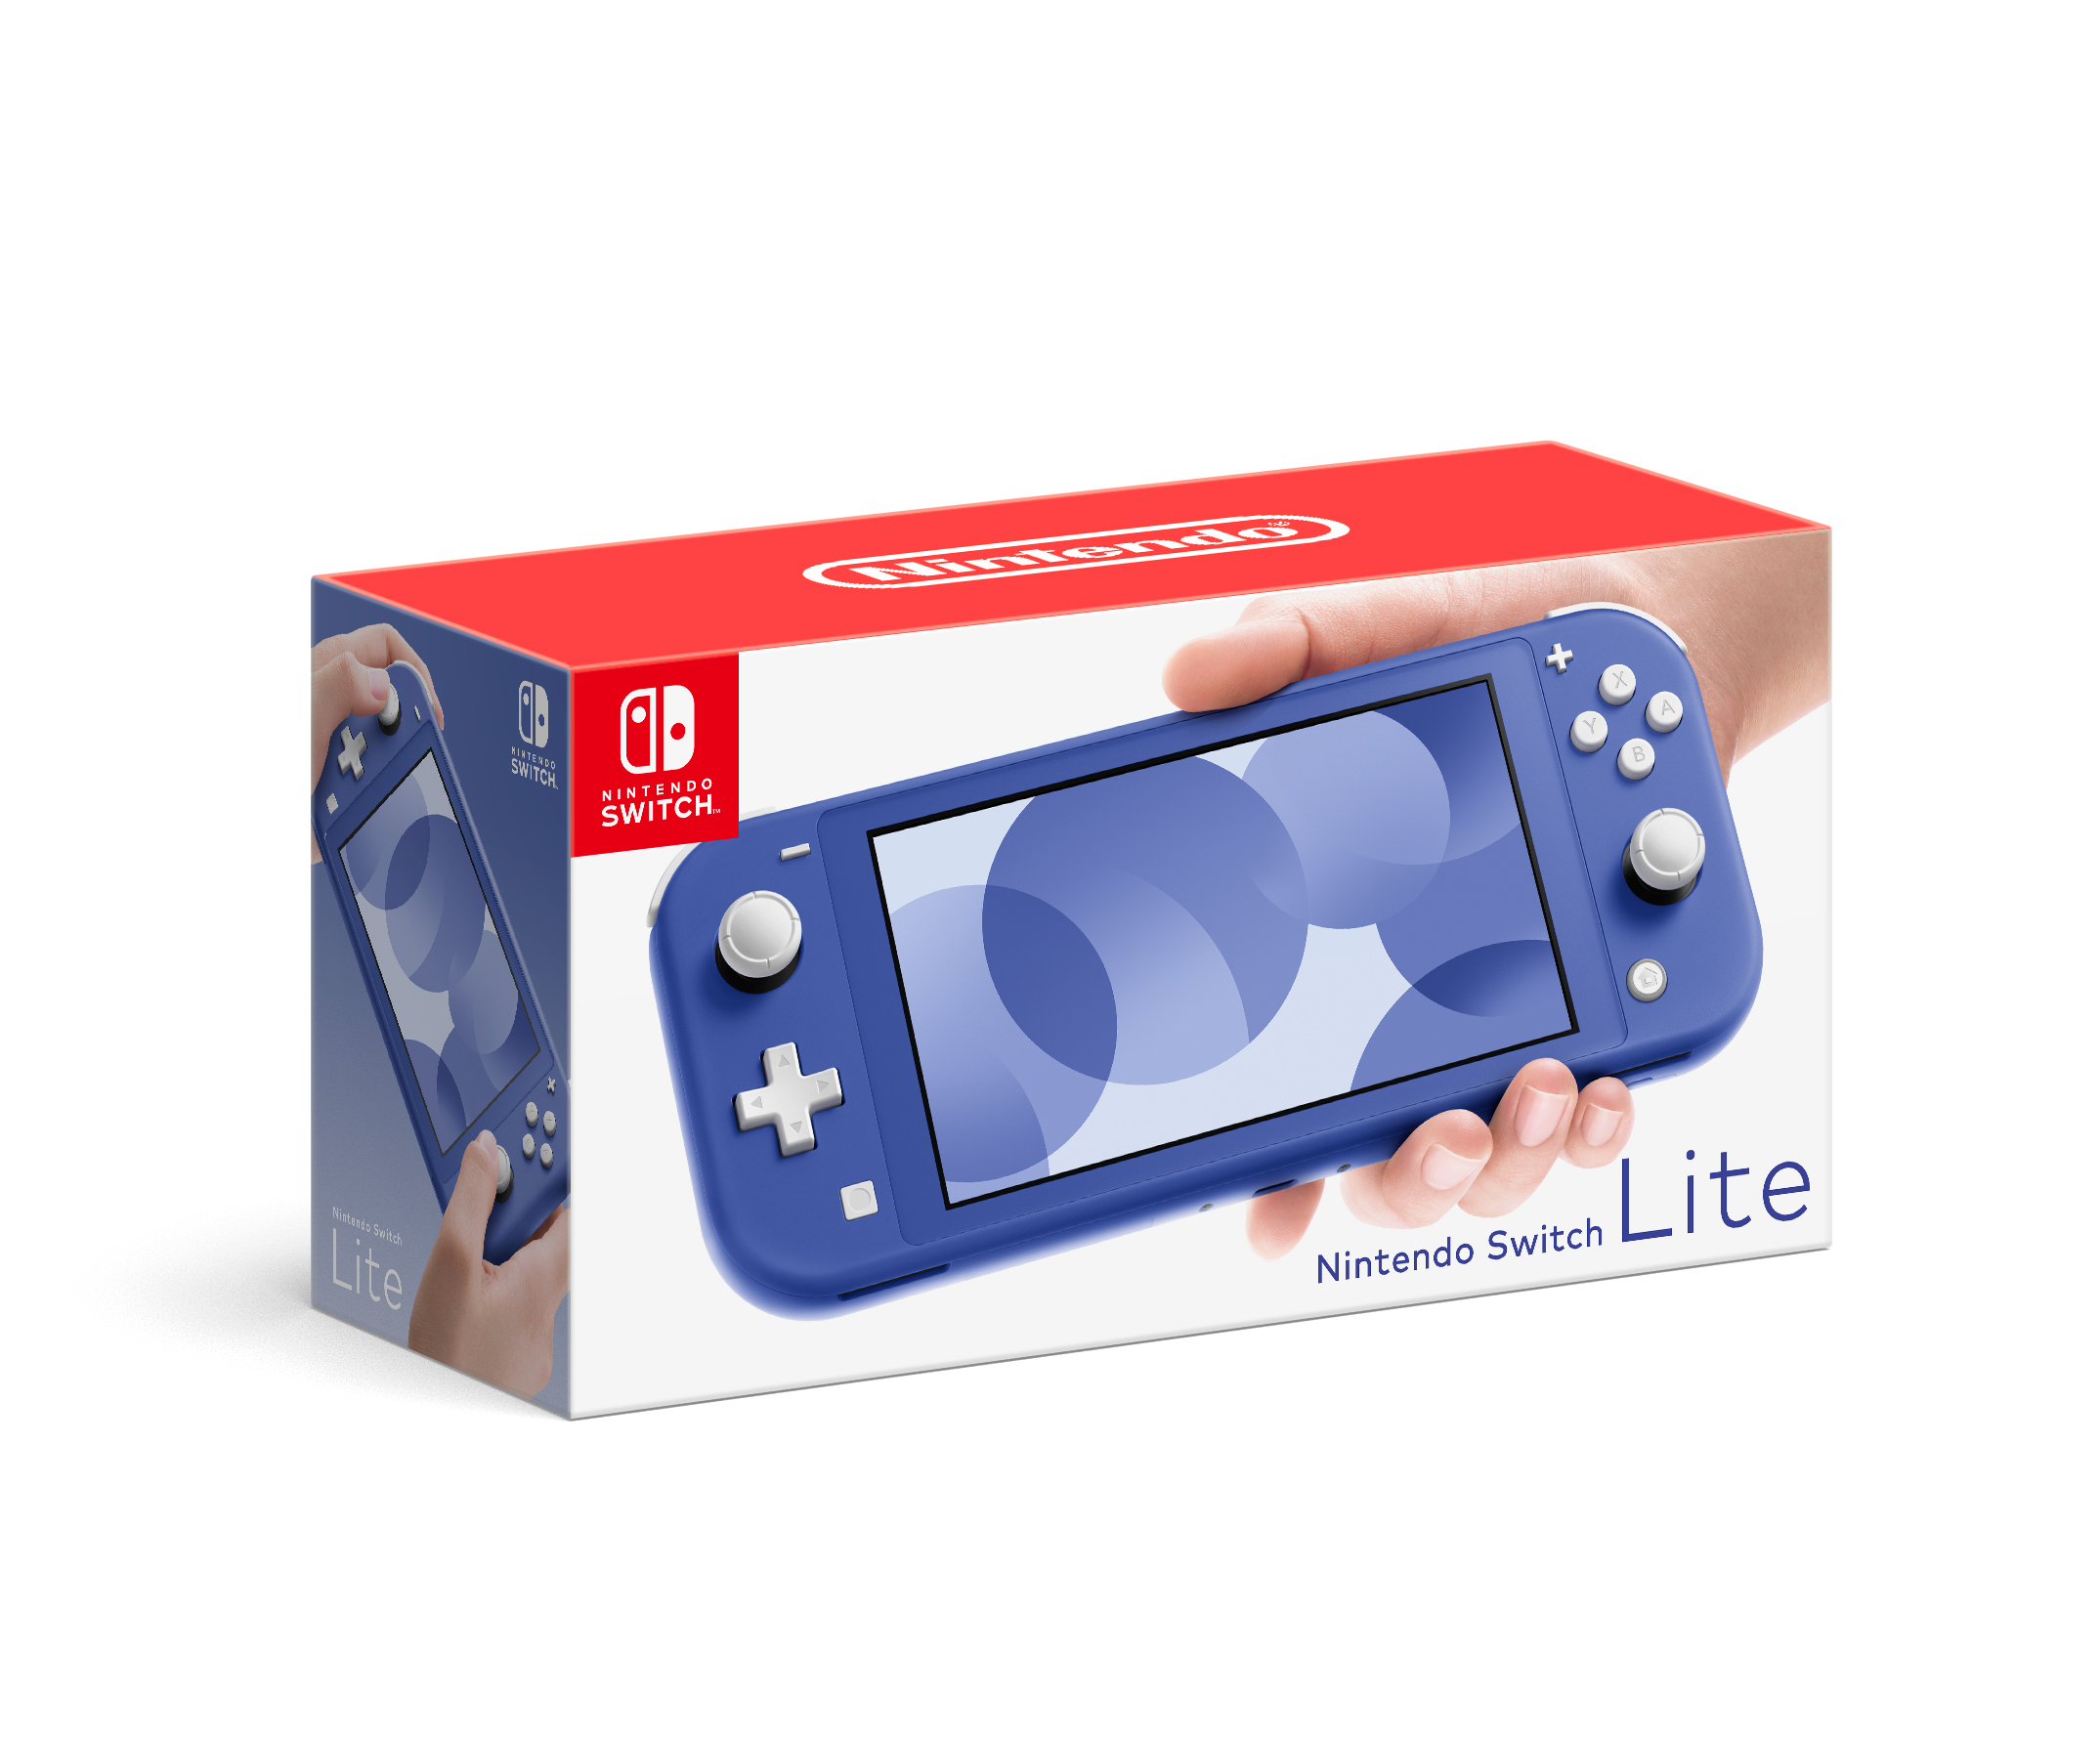 Nintendo of America on Twitter: "Introducing a fresh new blue color #NintendoSwitchLite, launching on 5/21 for $199.99. The blue Nintendo Switch Lite will release separately the day as the hilarious